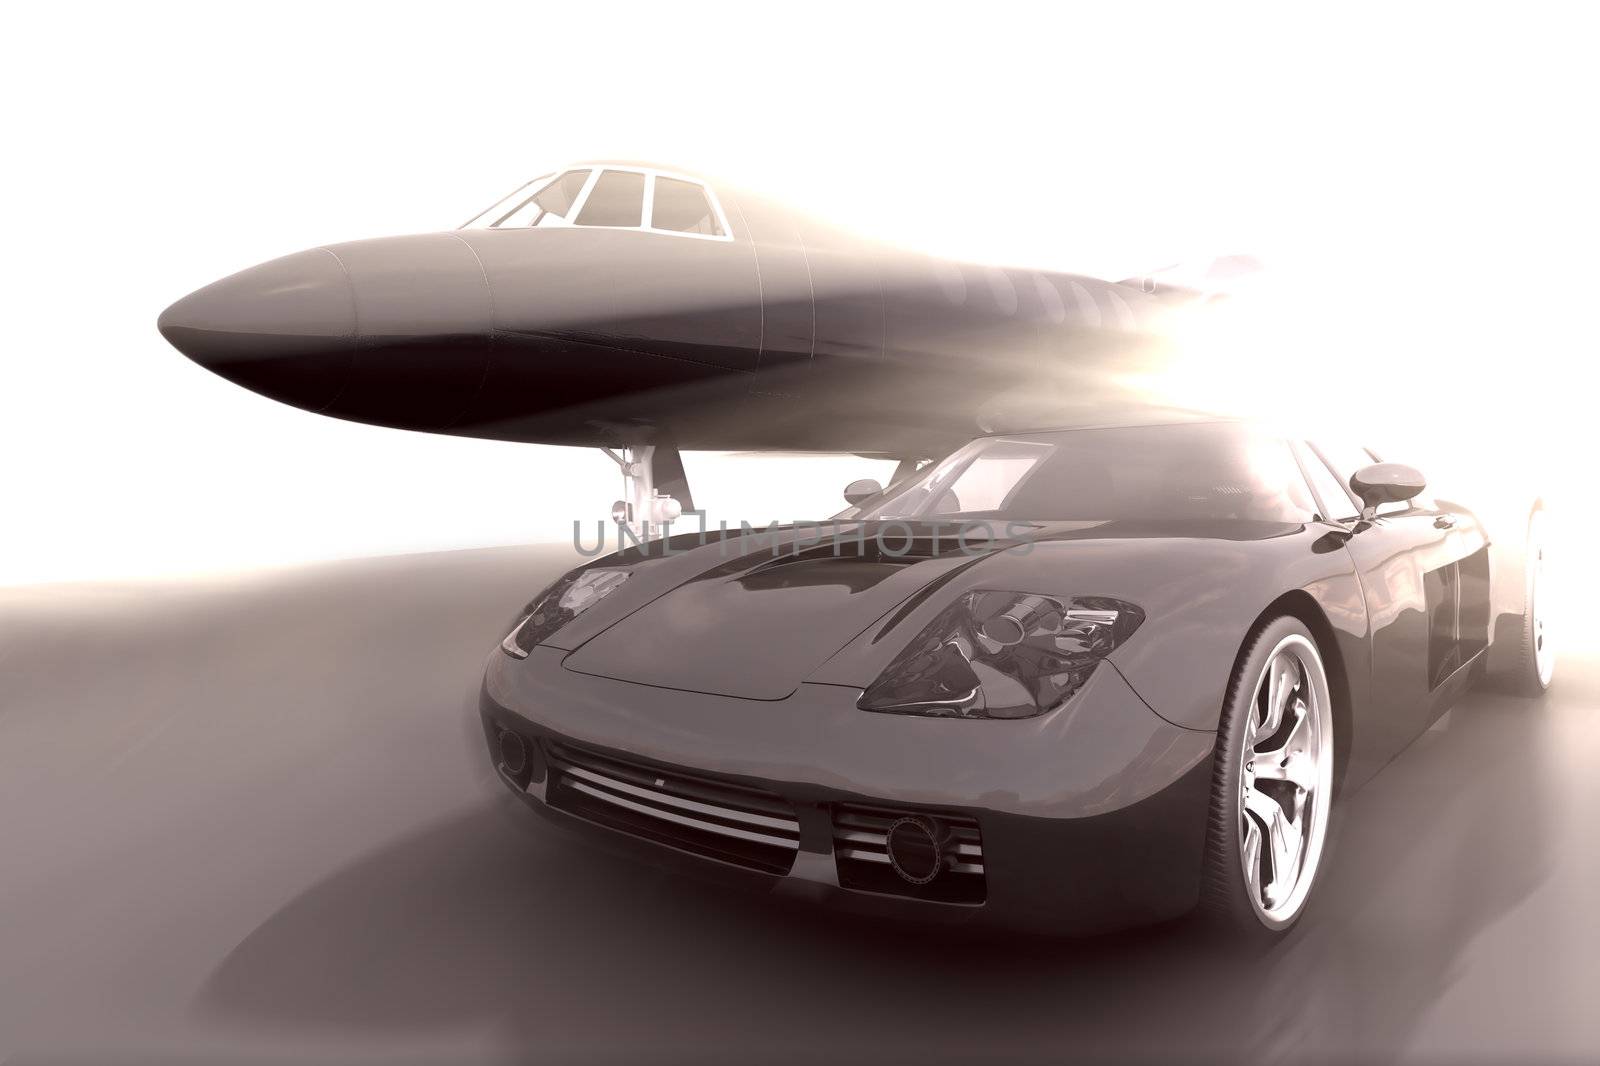 Airplane and car in dramatic conceptual scene